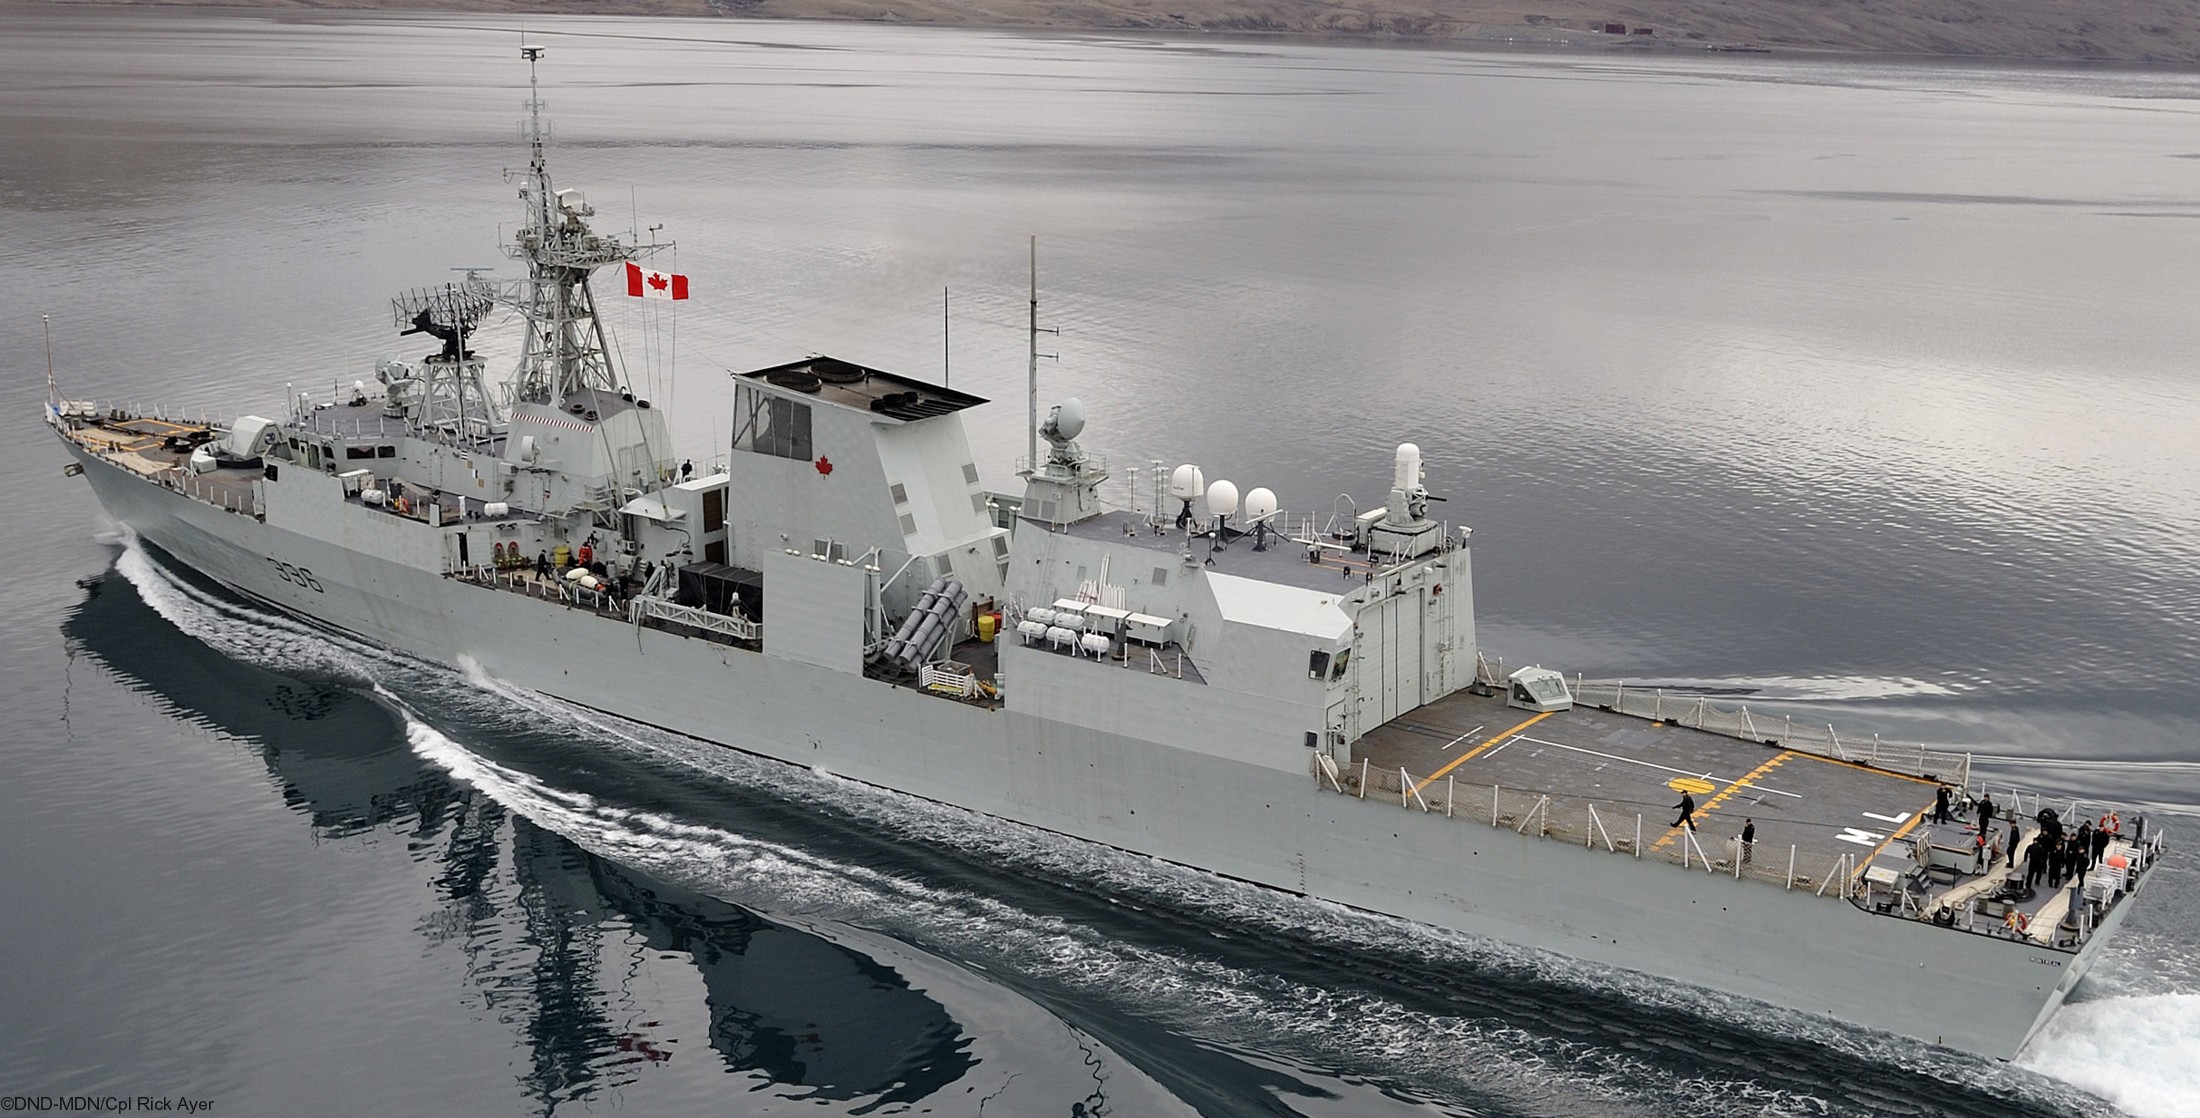 ffh-336 hmcs montreal halifax class helicopter patrol frigate ncsm royal canadian navy 02